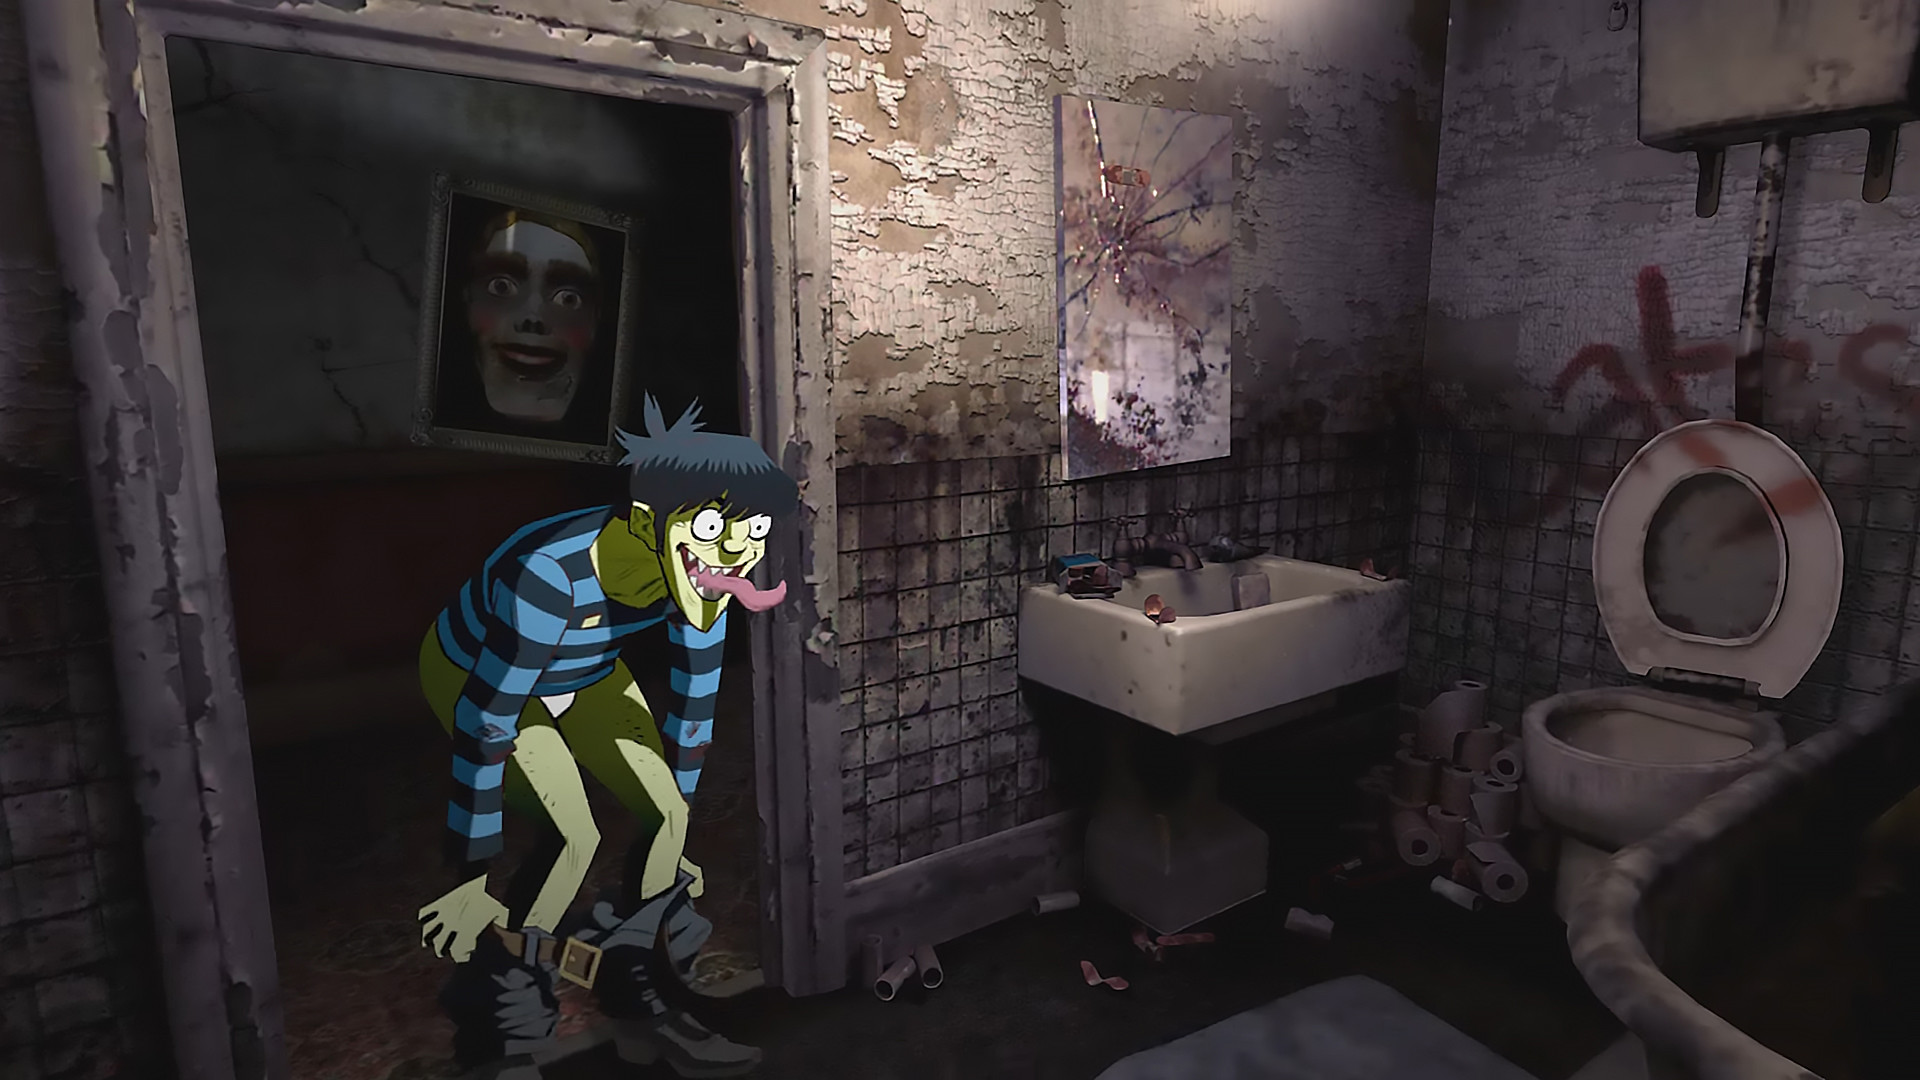 1920x1080 Just the bath , from the song: Gorillaz - Saturnz Barz (Spirit House)